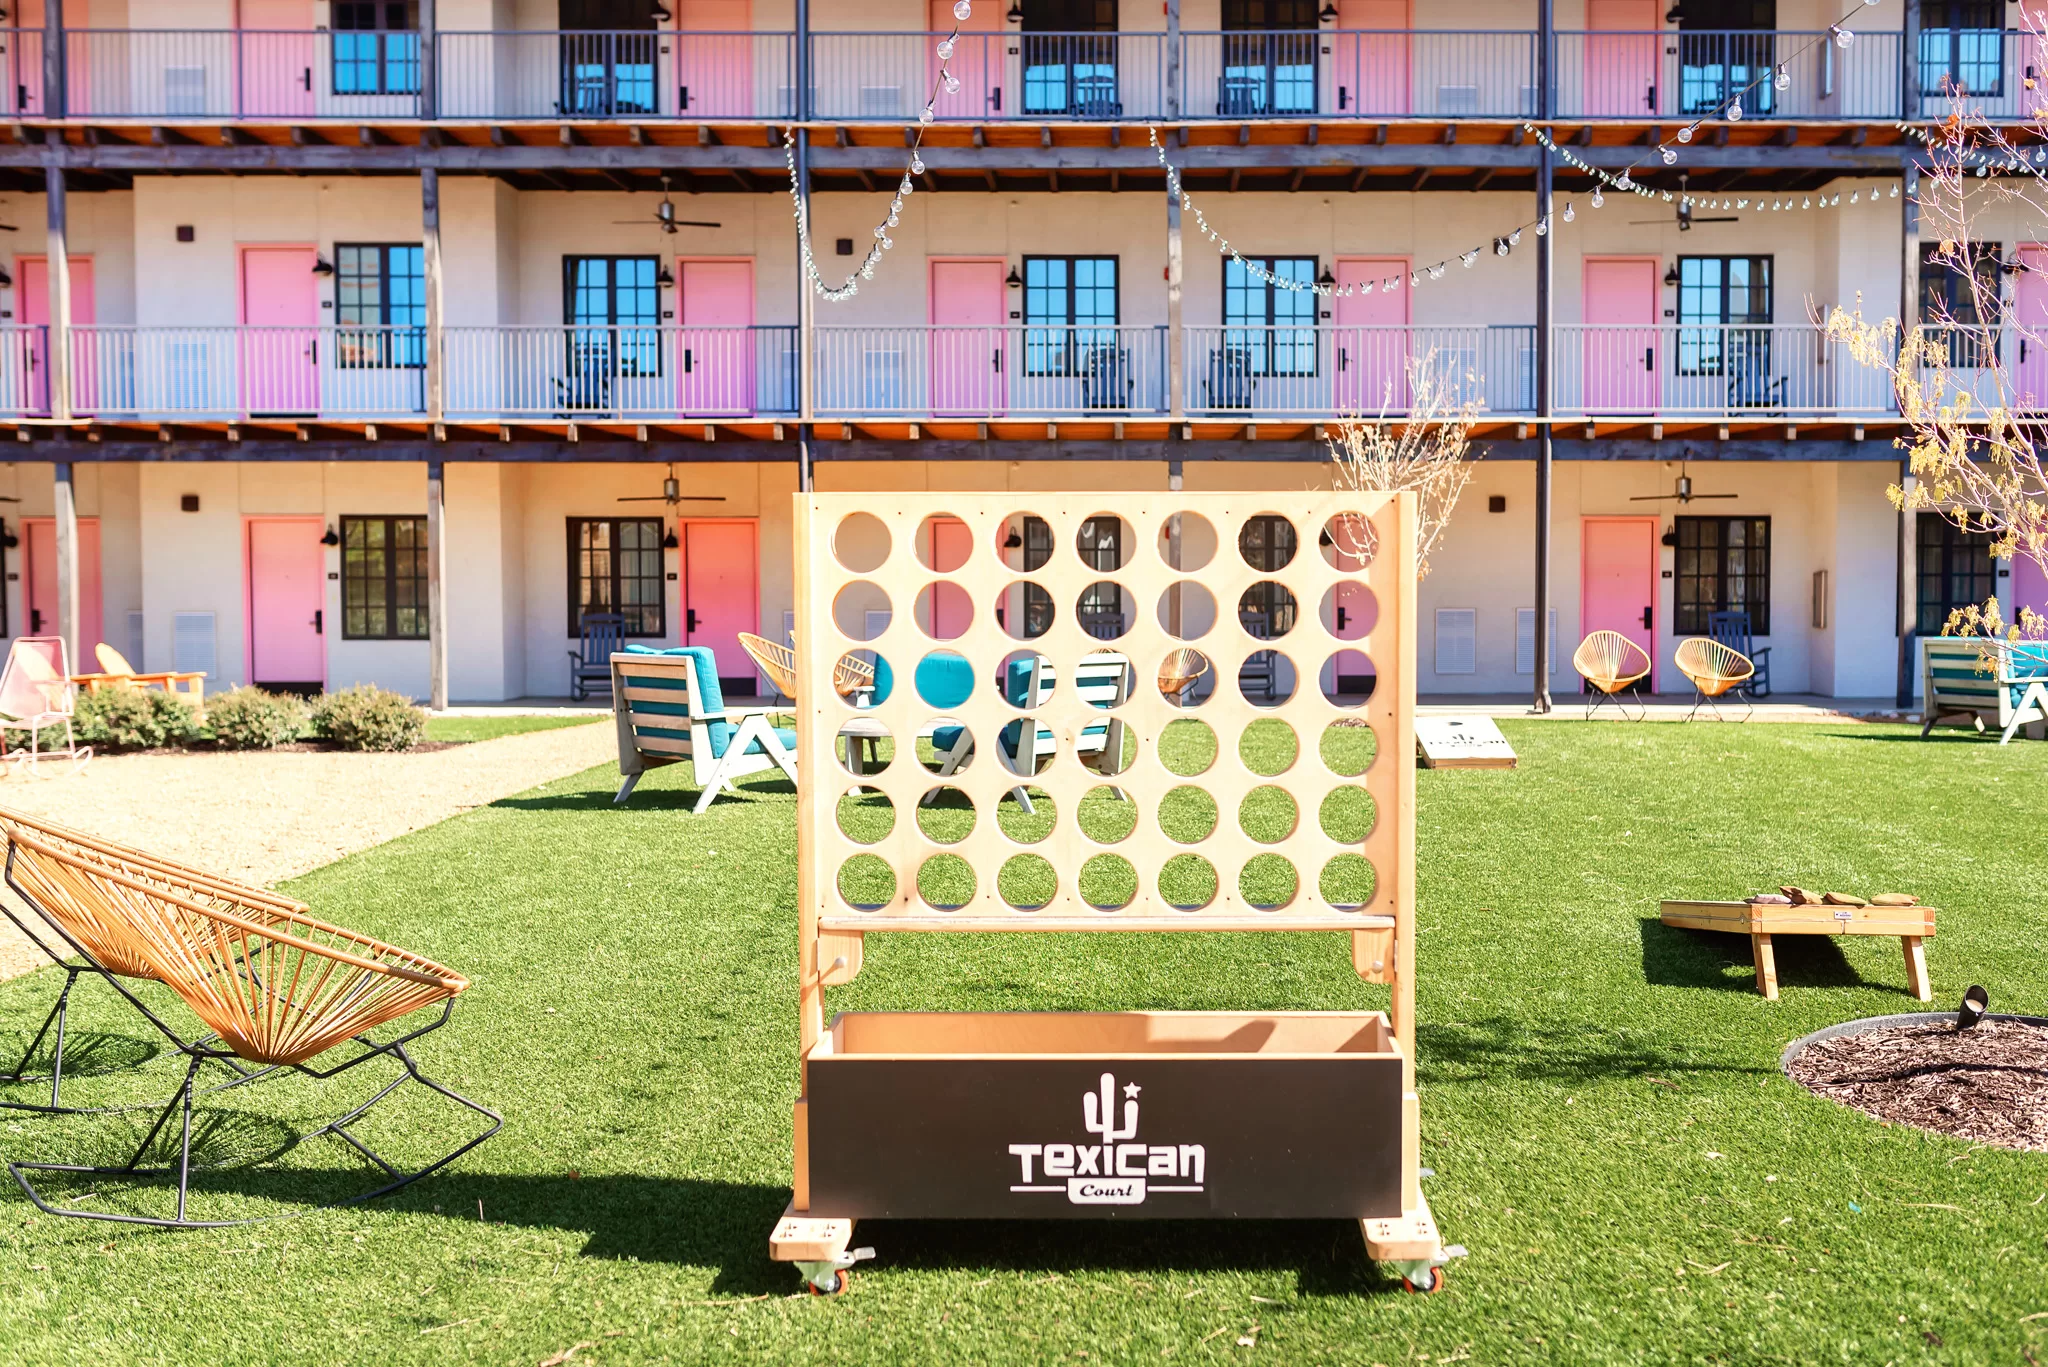 A giant tick tack toe game in a green courtyard at the Texican Ranch Hotel. You can see three stories of the hotel with pink doors in the background.